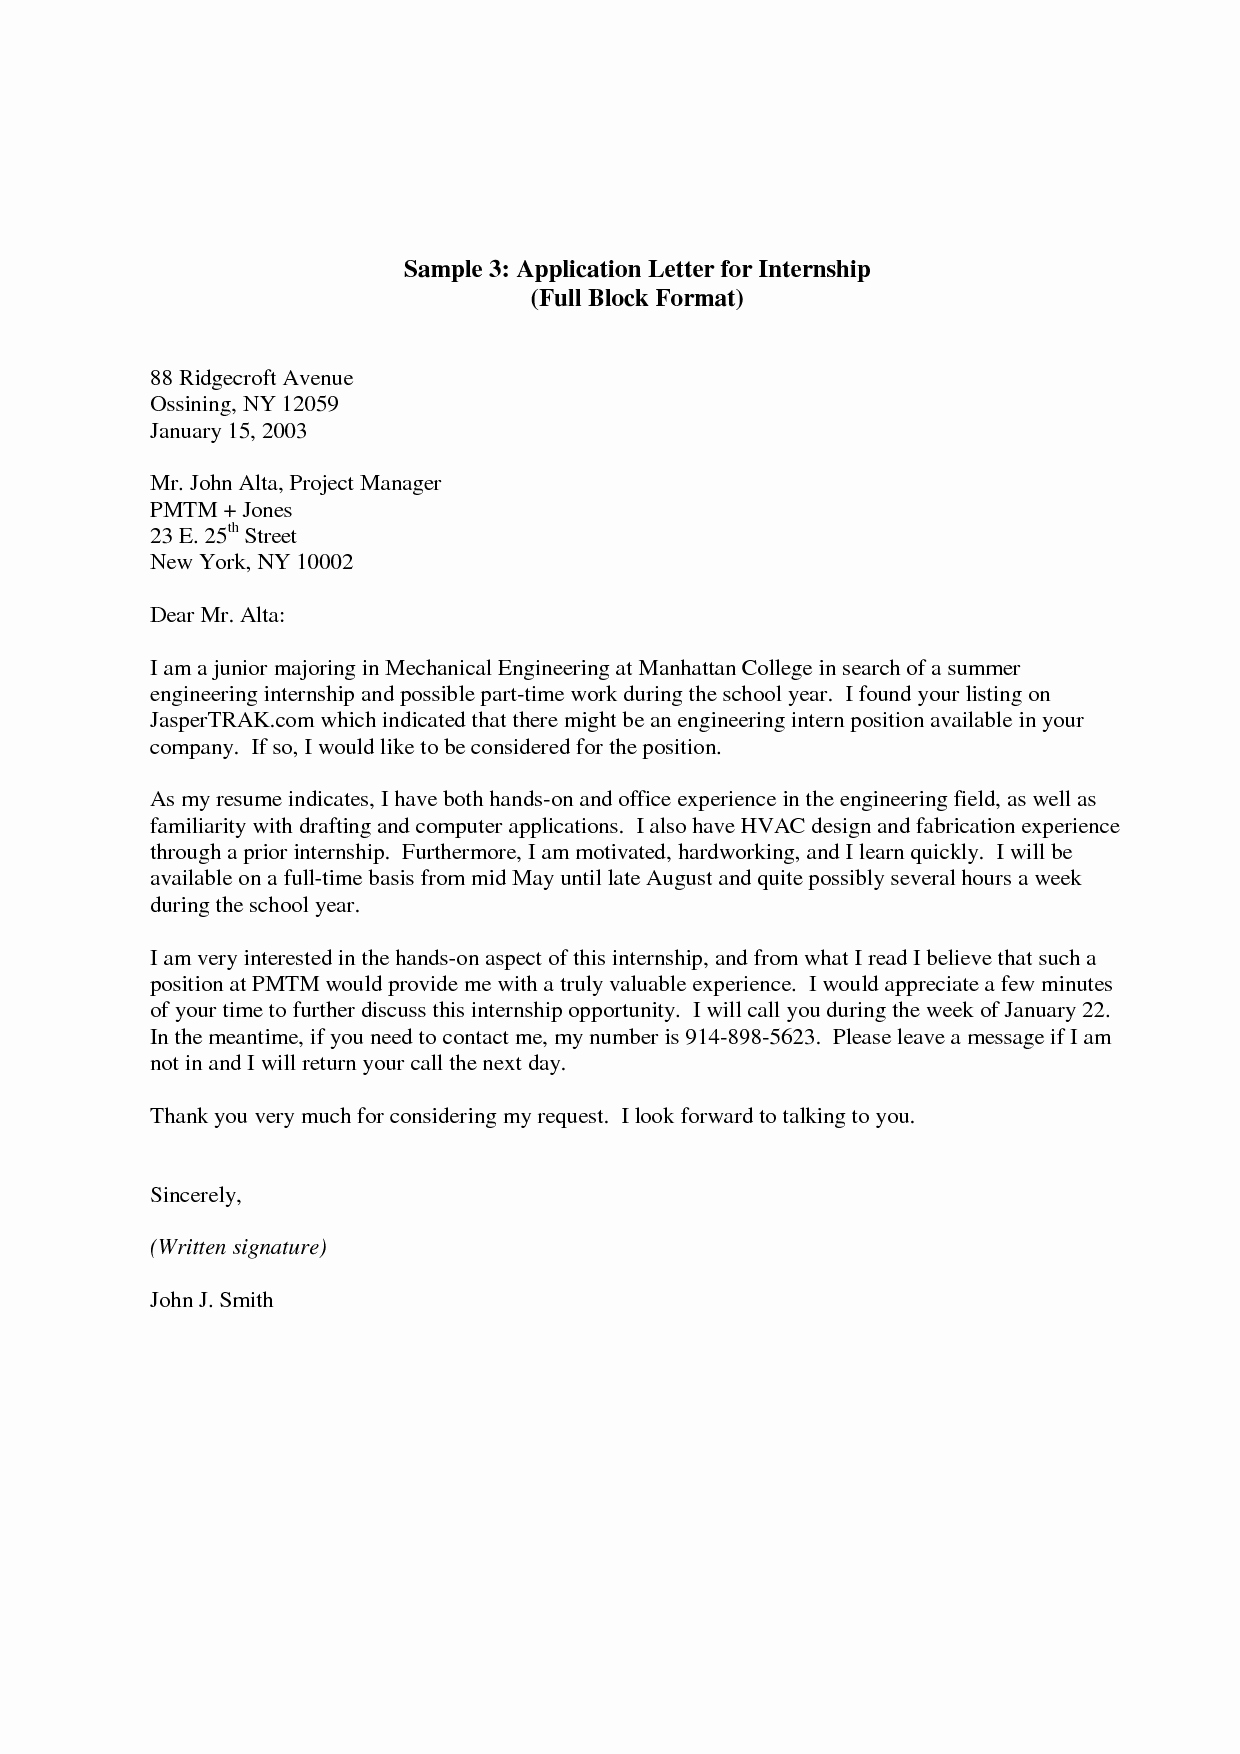 Cover Letter for Internship Examples Awesome Internship Application Letter Here is A Sample Cover